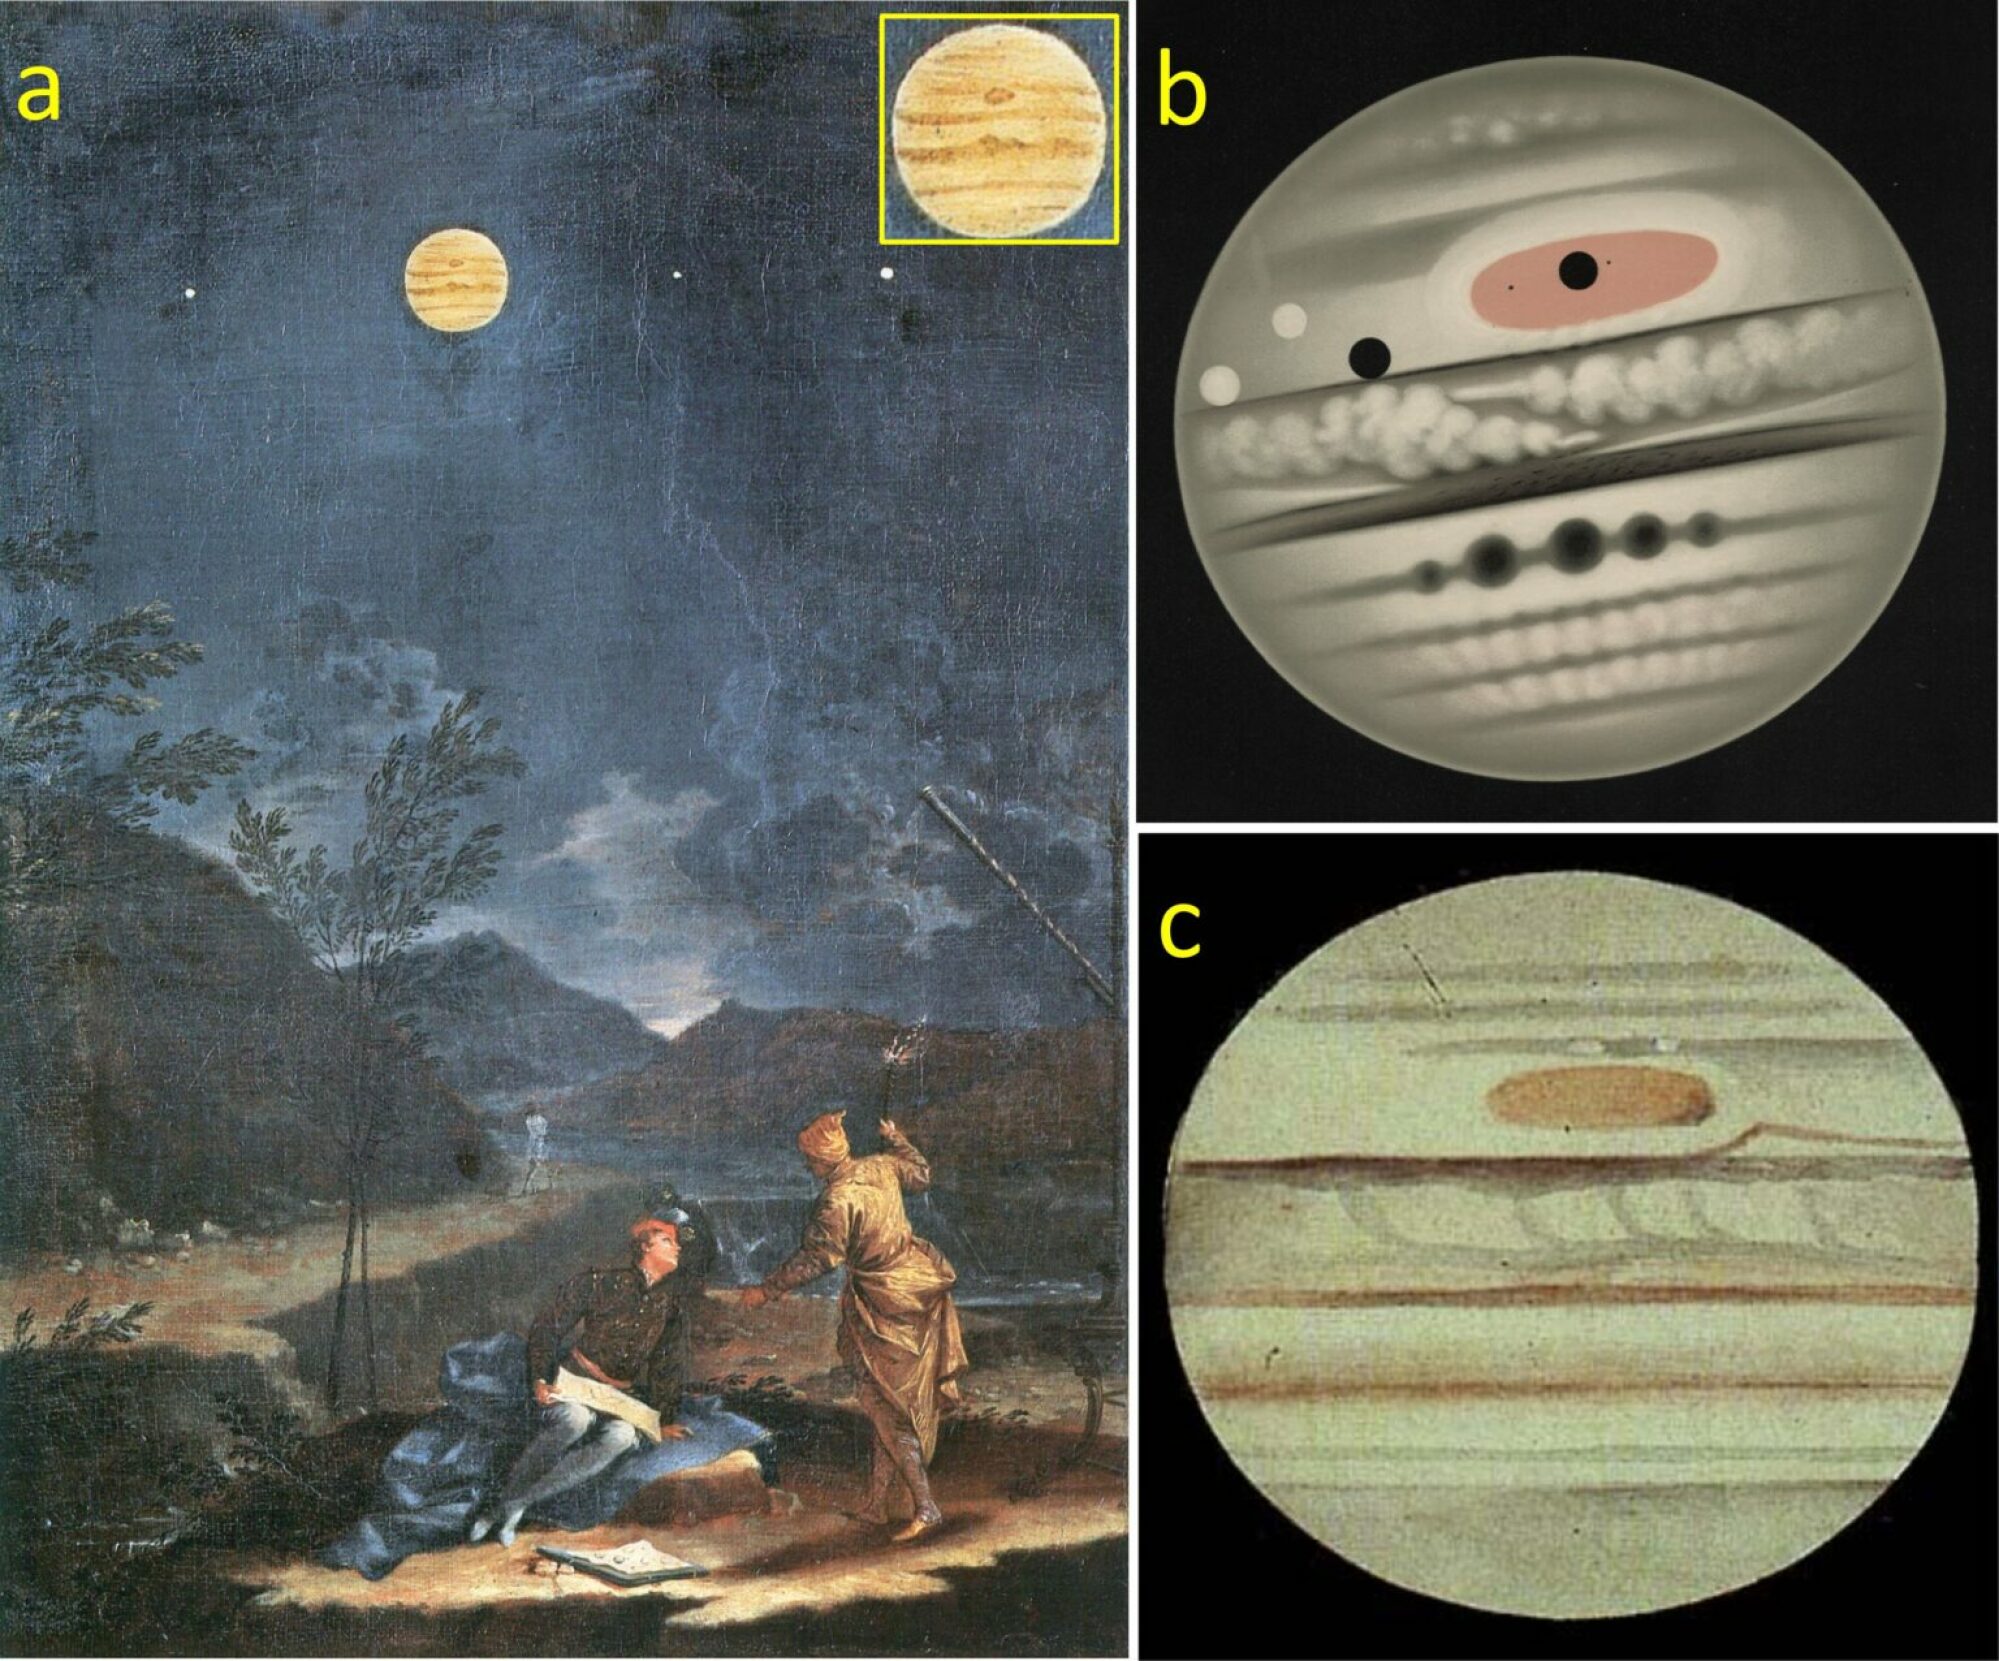 a: A 1711 painting with Jupiter by Donato Creti showing the Permanent Spot. b: A drawing by the French artist E. L. Trouvelot in November 1880, showing the Great Red Spot. c: A drawing by T. G. Elger in November 1881 showing the Great Red Spot.